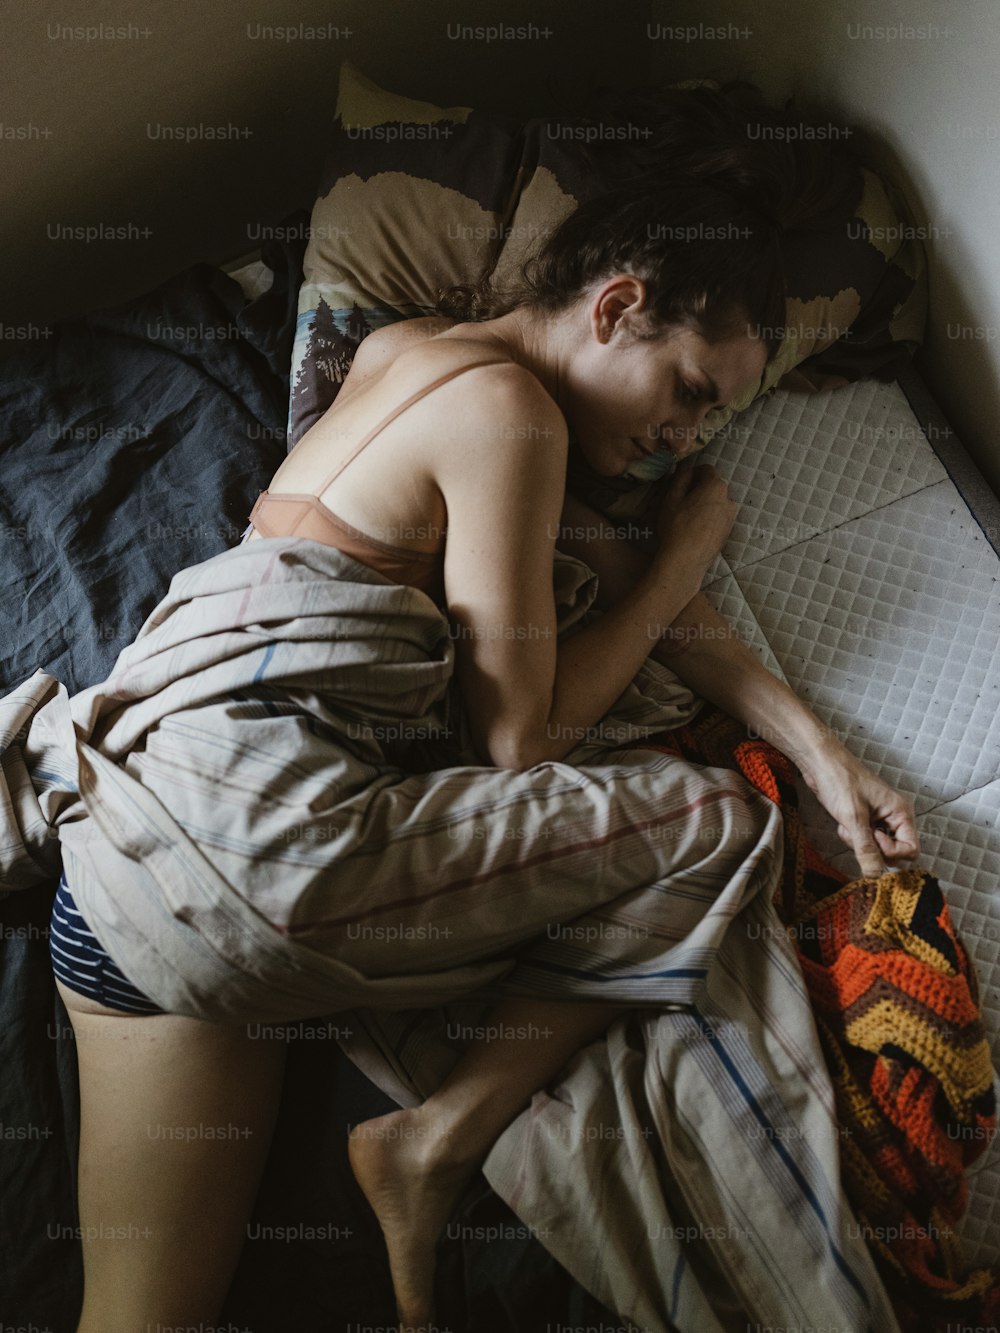 a shirtless man sleeping on a bed